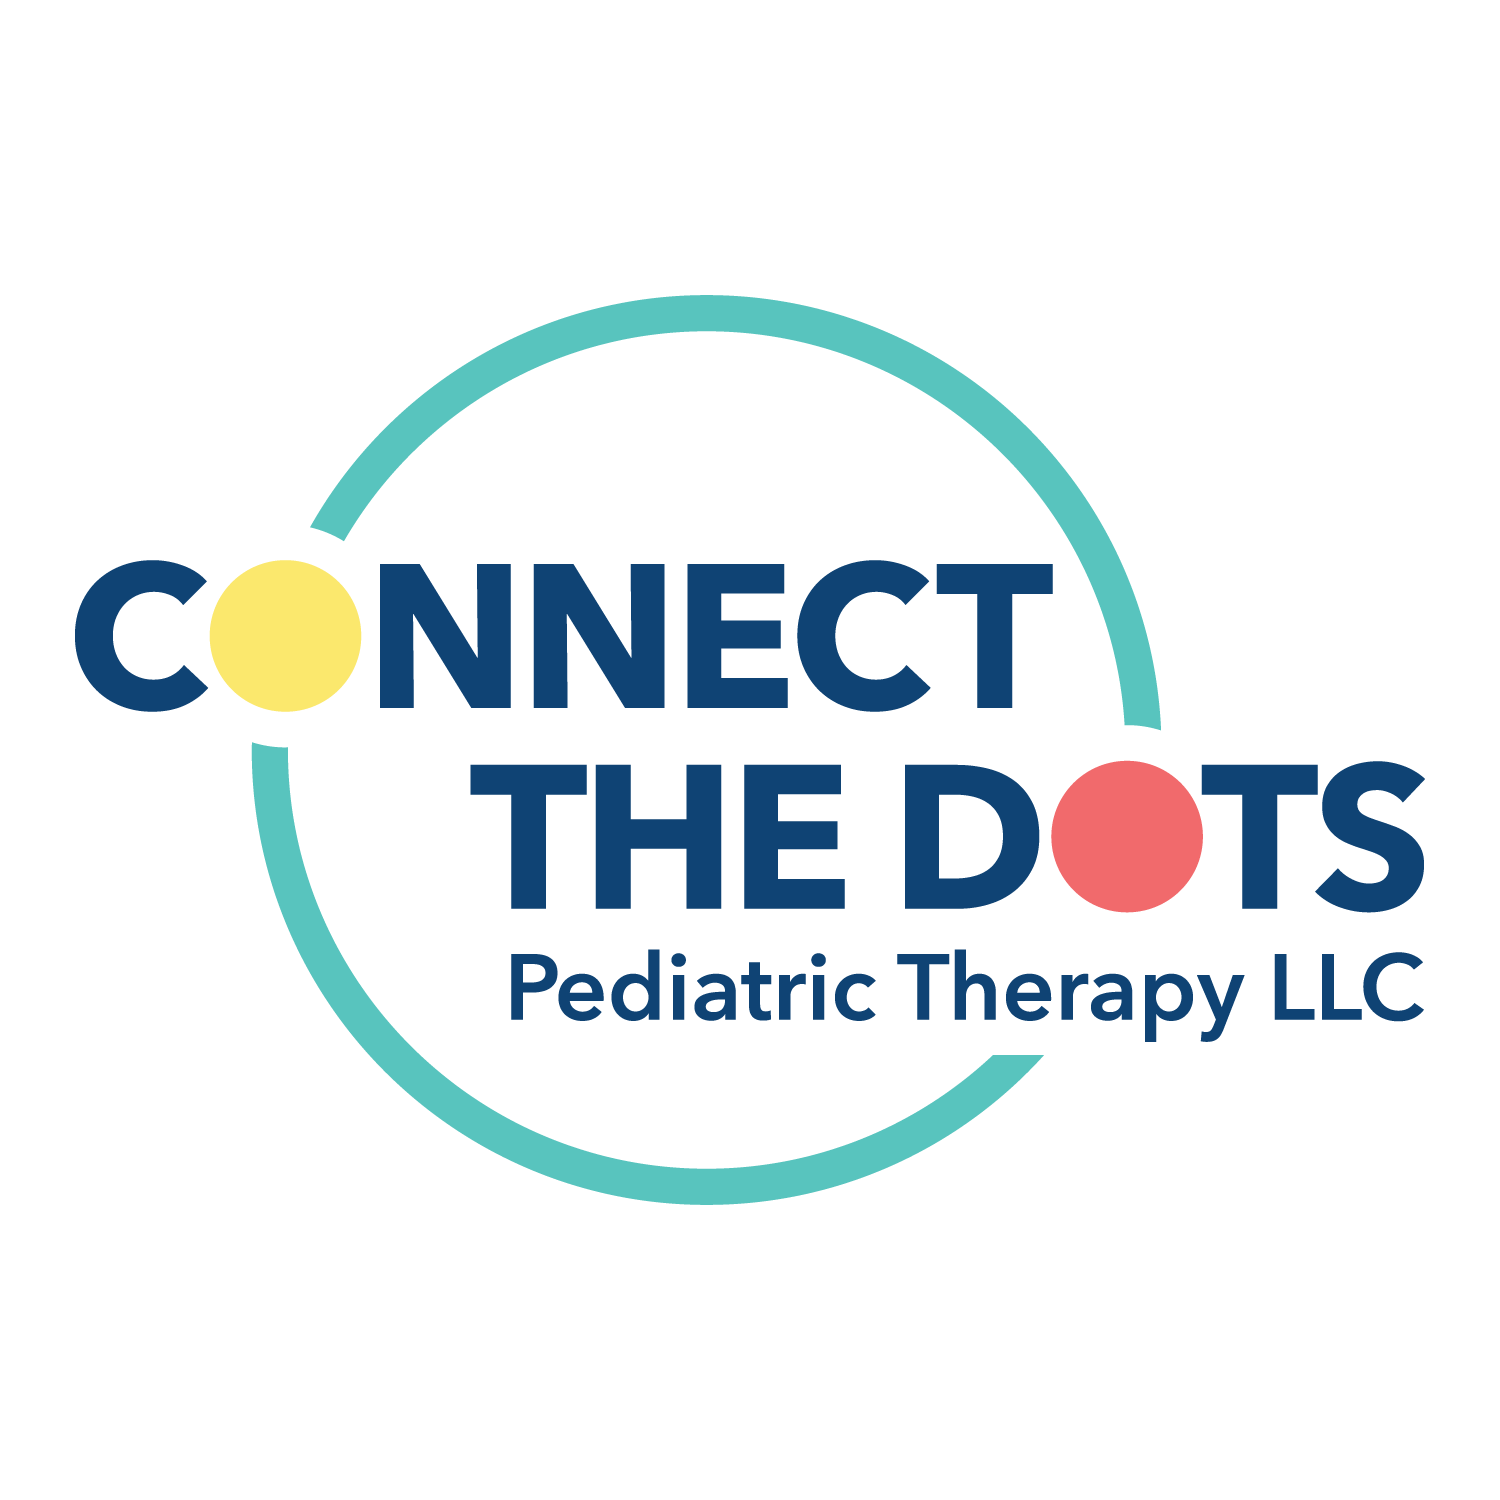 Connect The Dots Pediatric Therapy